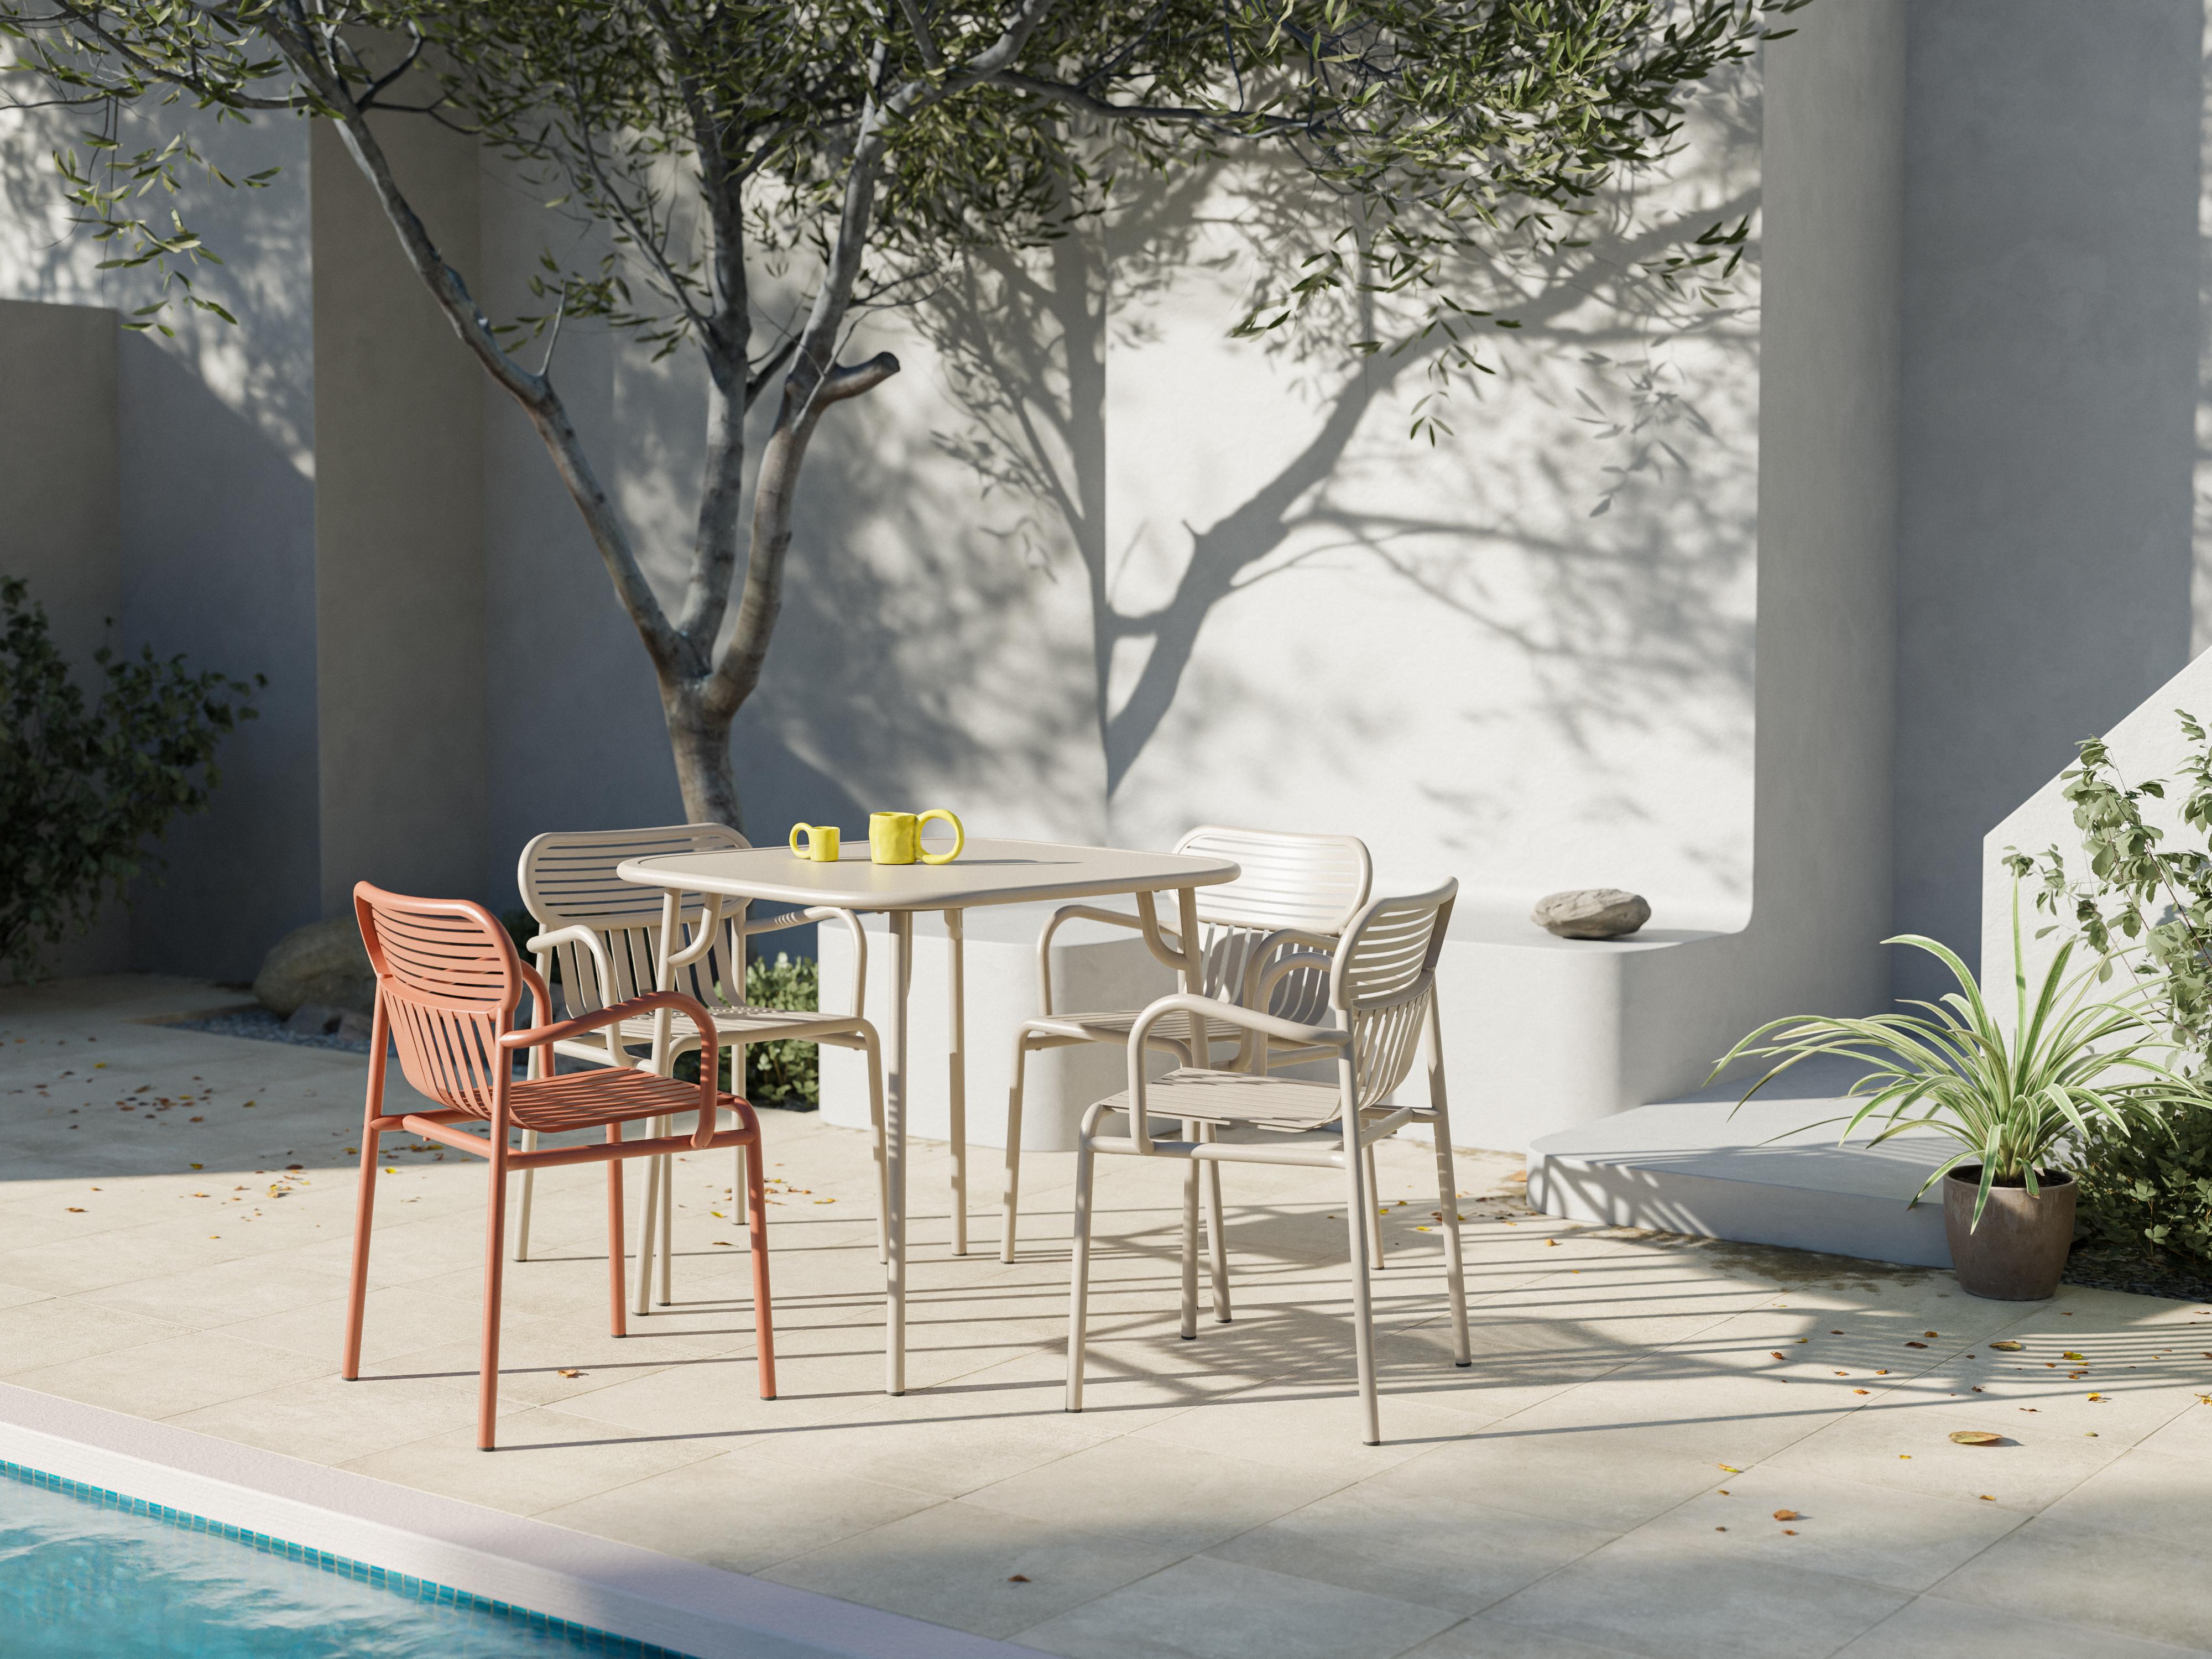 Petite Friture Week-End Plain Square Dining Table in Pearl Grey Aluminium by Studio BrichetZiegler, 2017

The week-end collection is a full range of outdoor furniture, in aluminium grained epoxy paint, matt finish, that includes 18 functions and 8